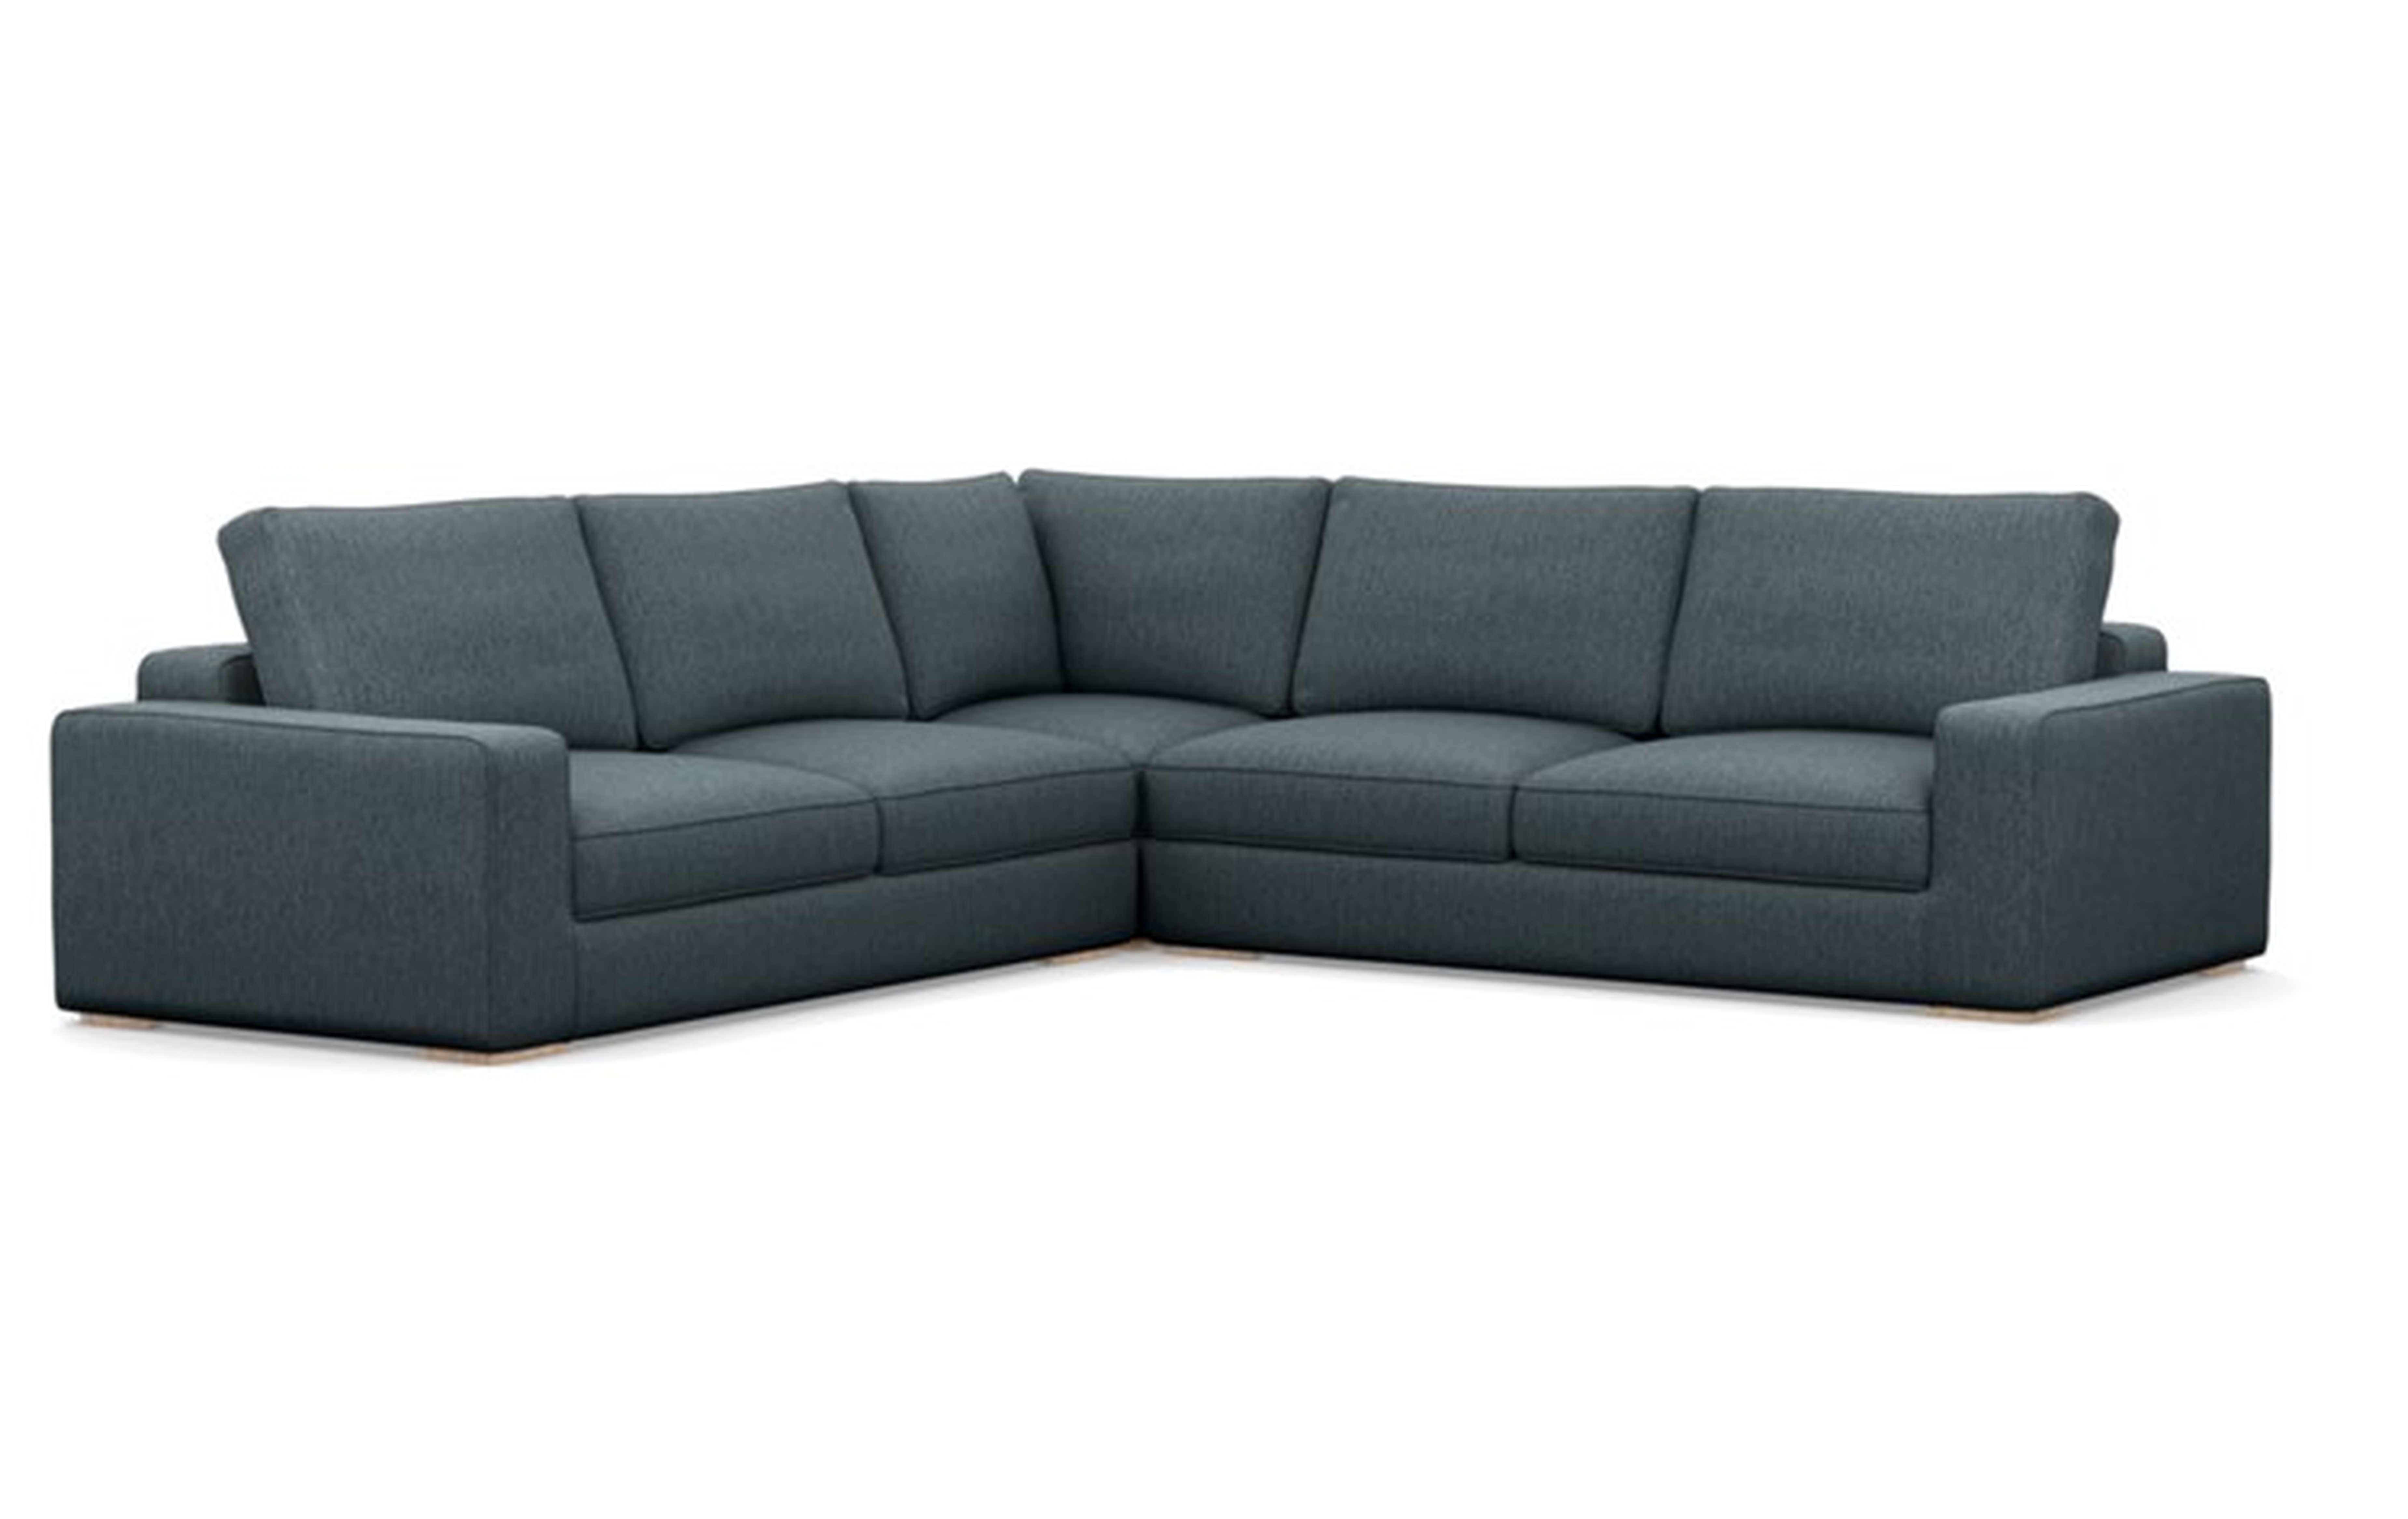 Ainsley Corner Sectional with Blue Rain Fabric, double down cushions, and Natural Oak legs - Interior Define